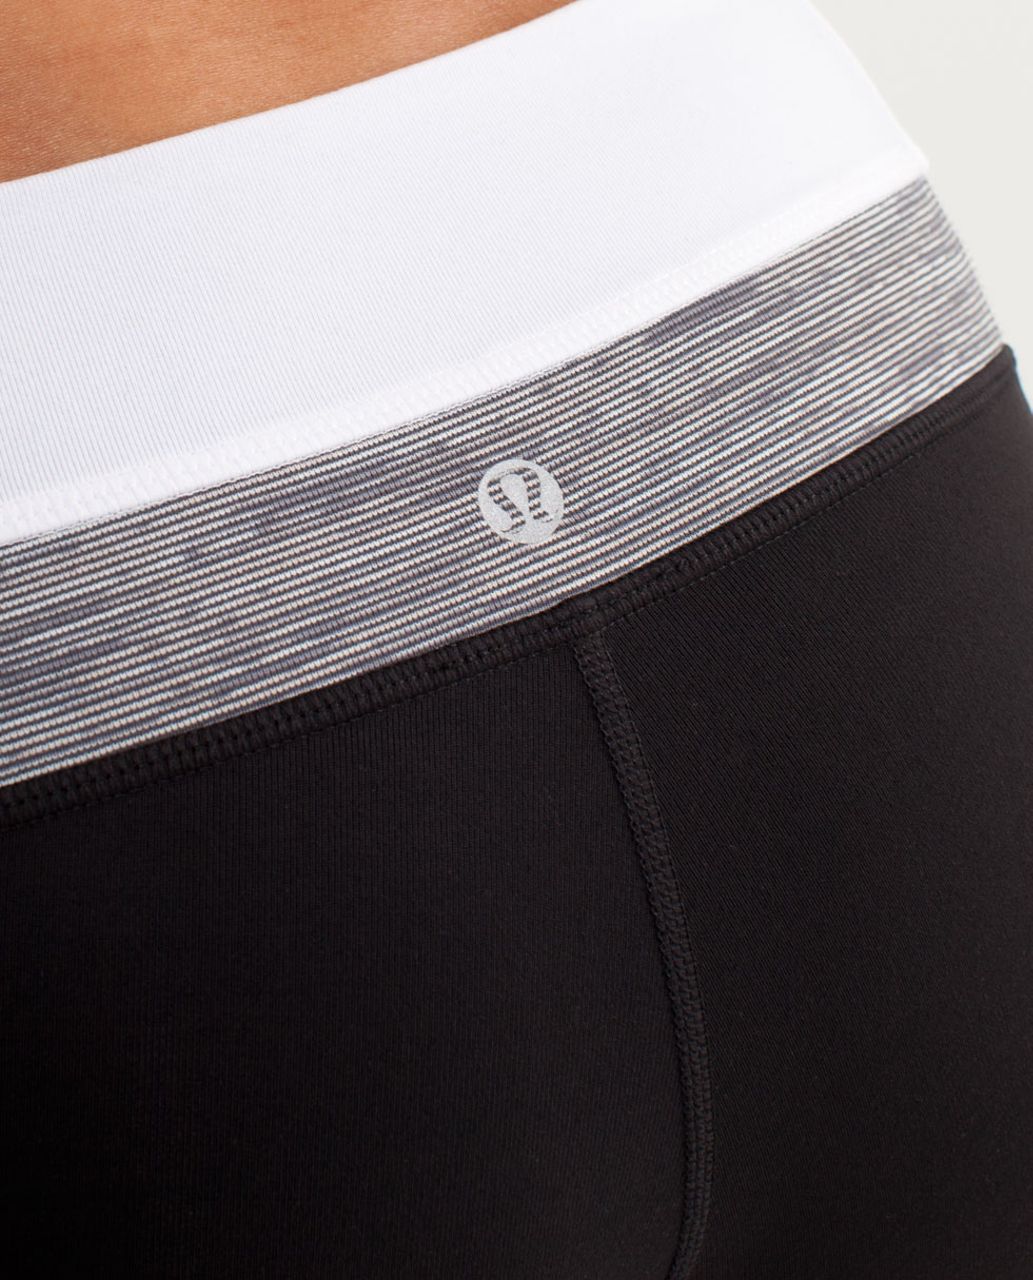 Lululemon Groove Pant (Regular) - Black /  White /  Wee Are From Space Coal Fossil